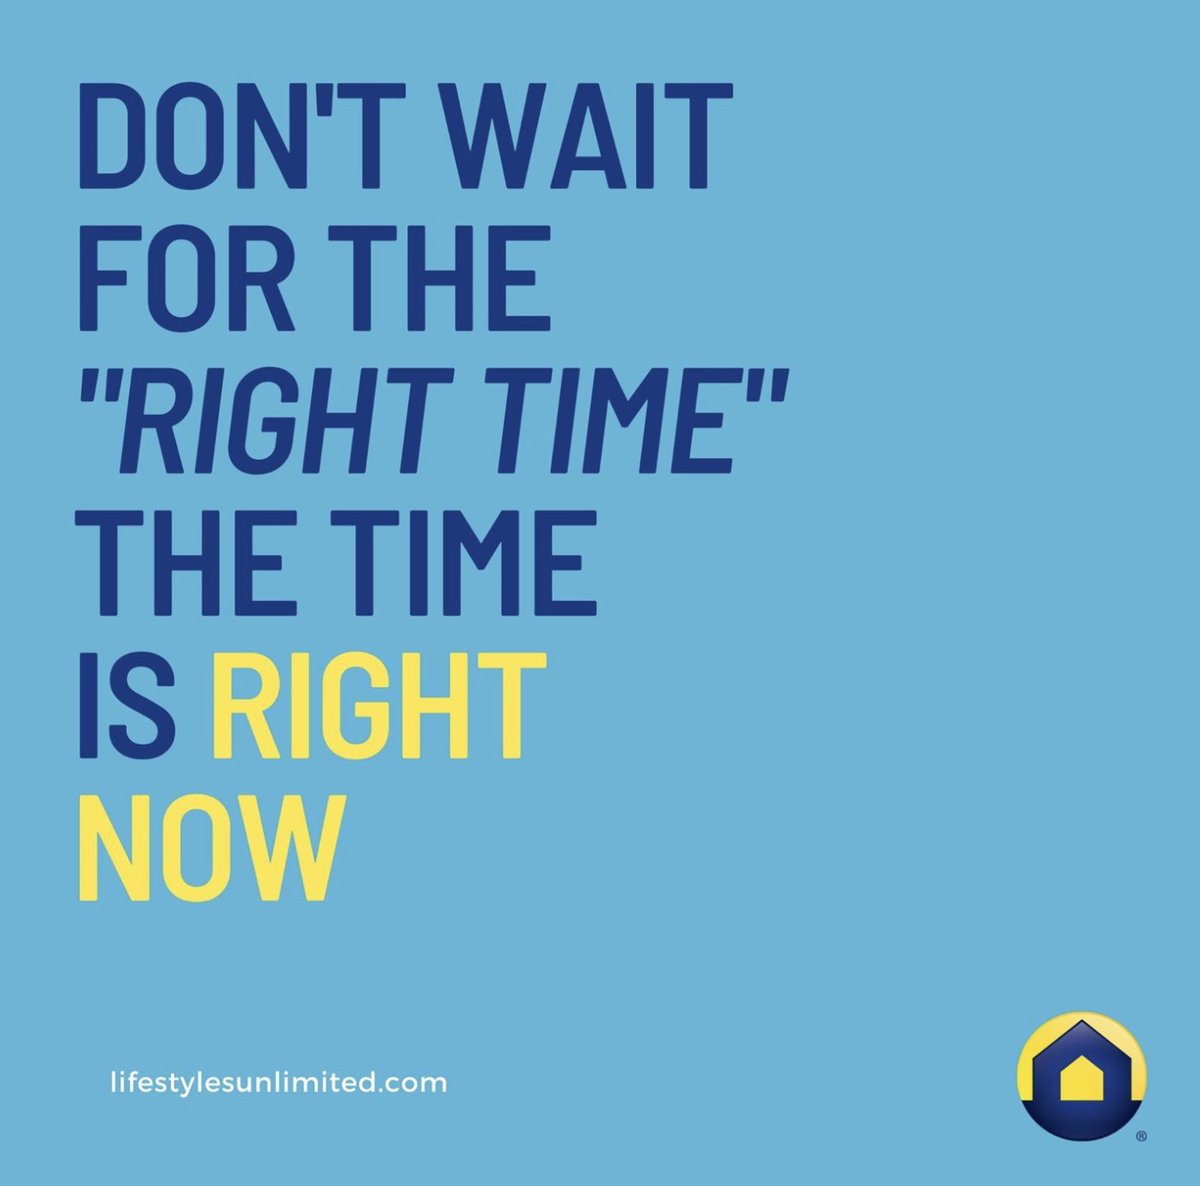 How often have we said 'it's not the right time' or 'I am not ready yet'. vist.ly/367cp #lifestylesunlimited #timeisnow #realestateinvest #wealth